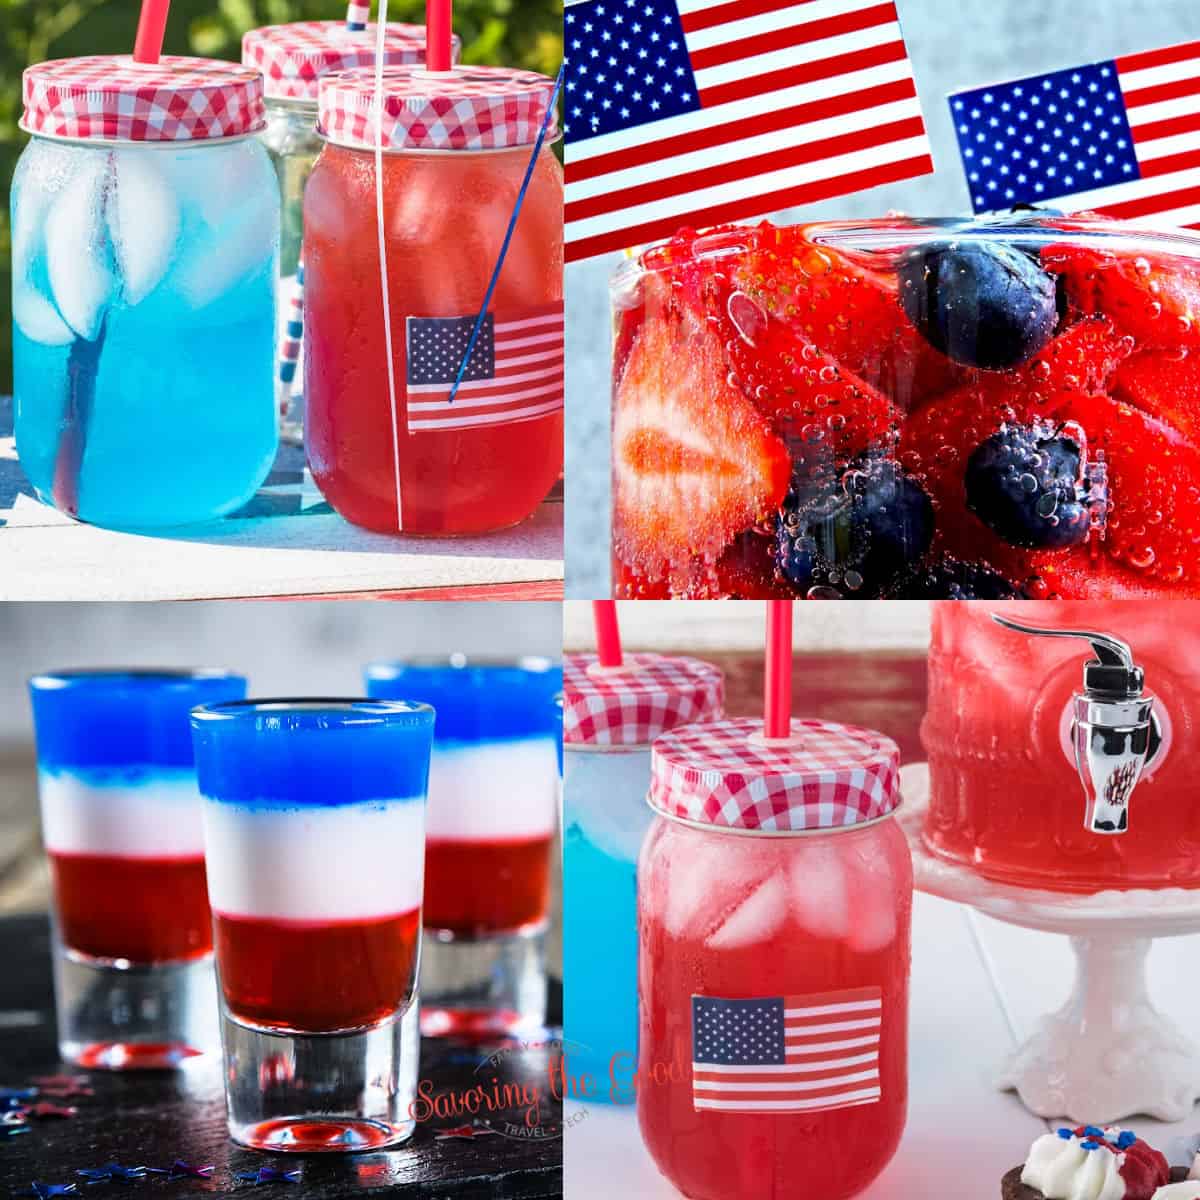 35 Best Red White & Blue Mixed Drinks (Cocktails) - Savoring The Good®